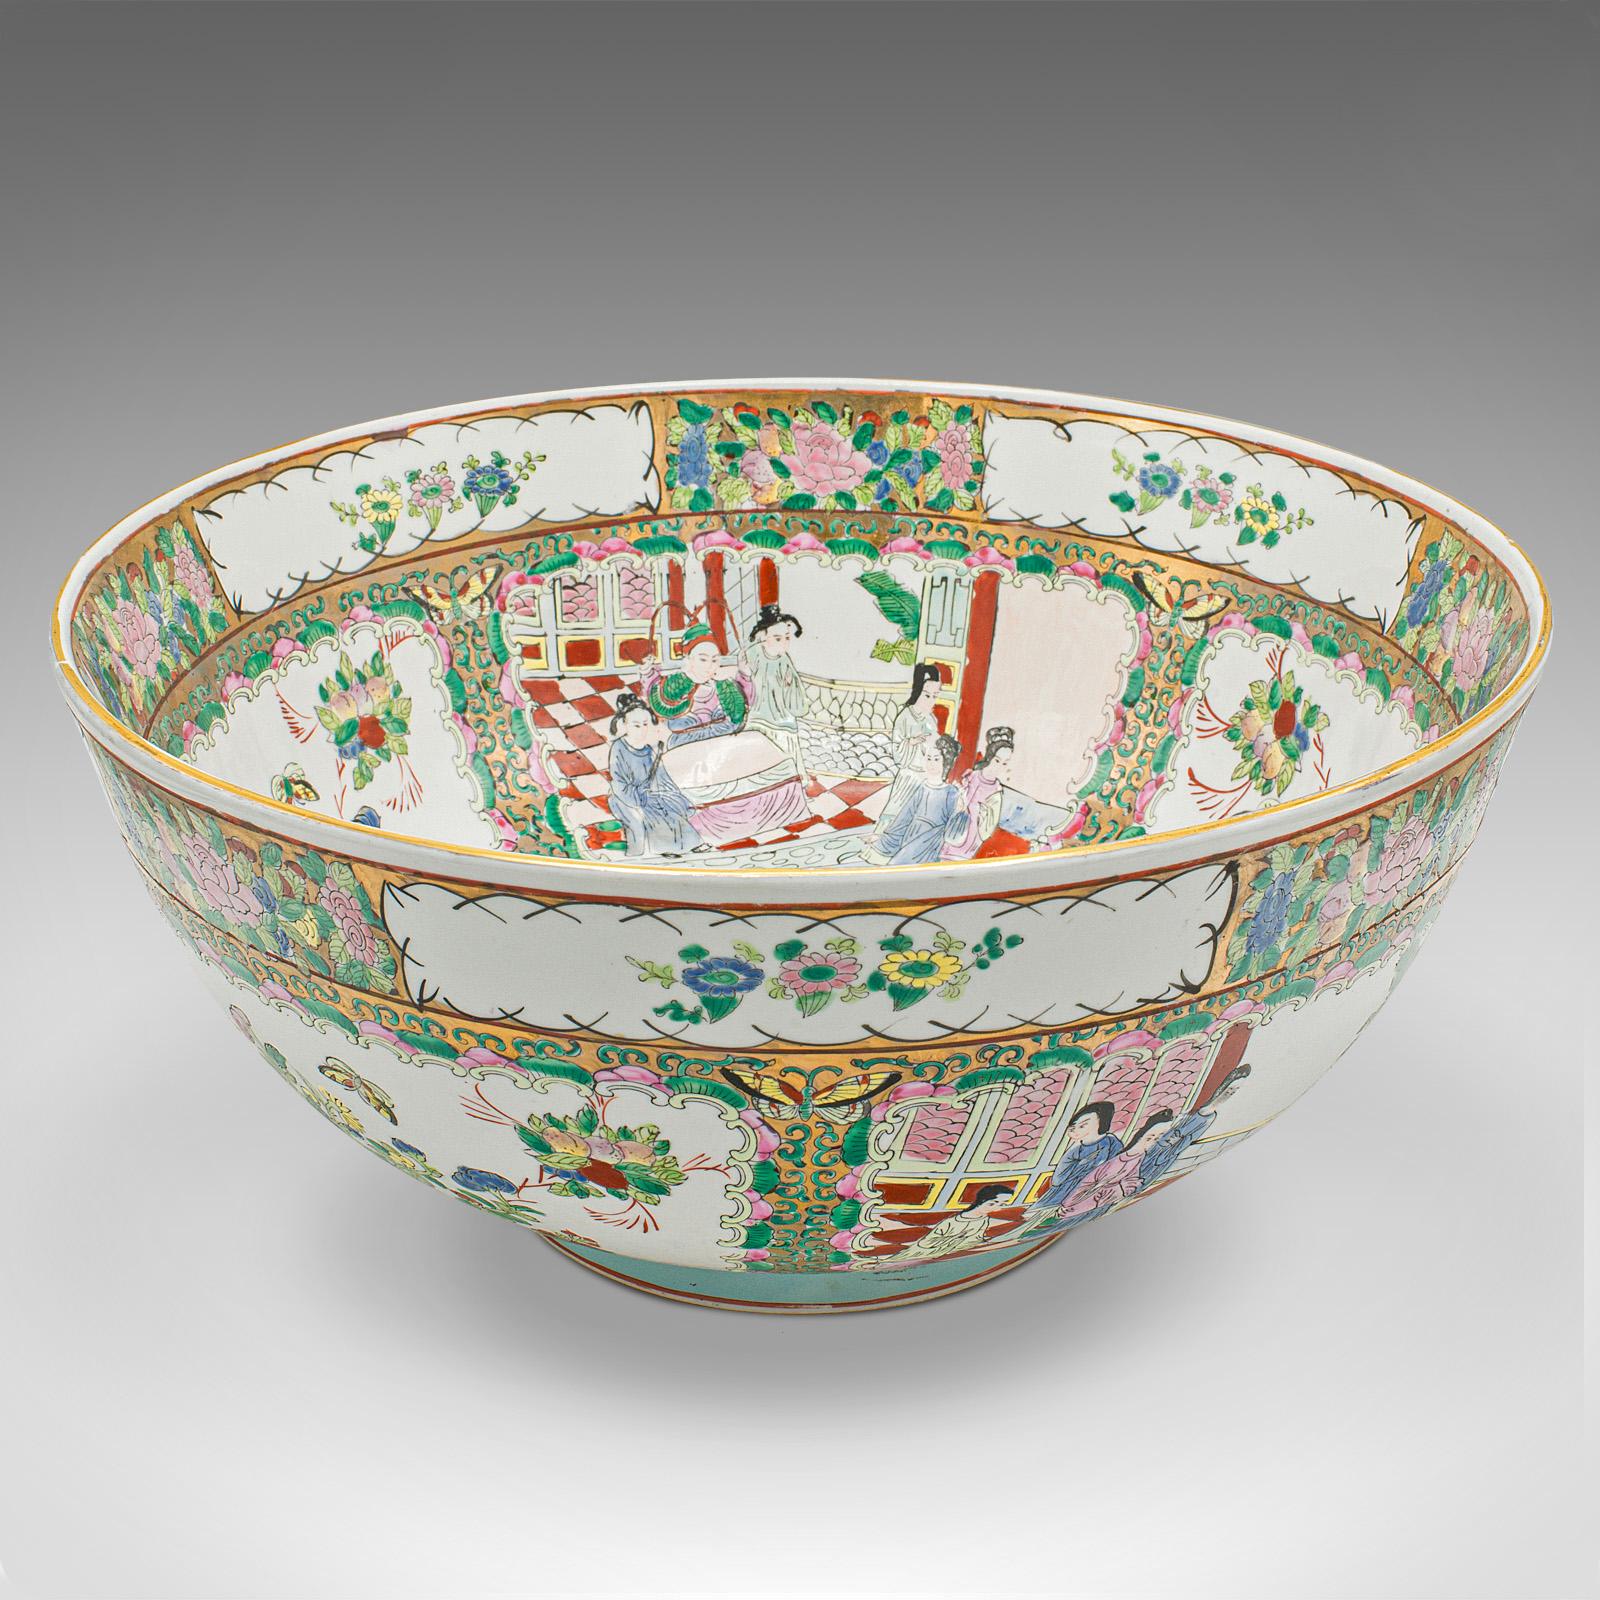 20th Century Large Vintage Famille Rose Bowl, Chinese, Ceramic, Art Deco, Dish, Circa 1940 For Sale